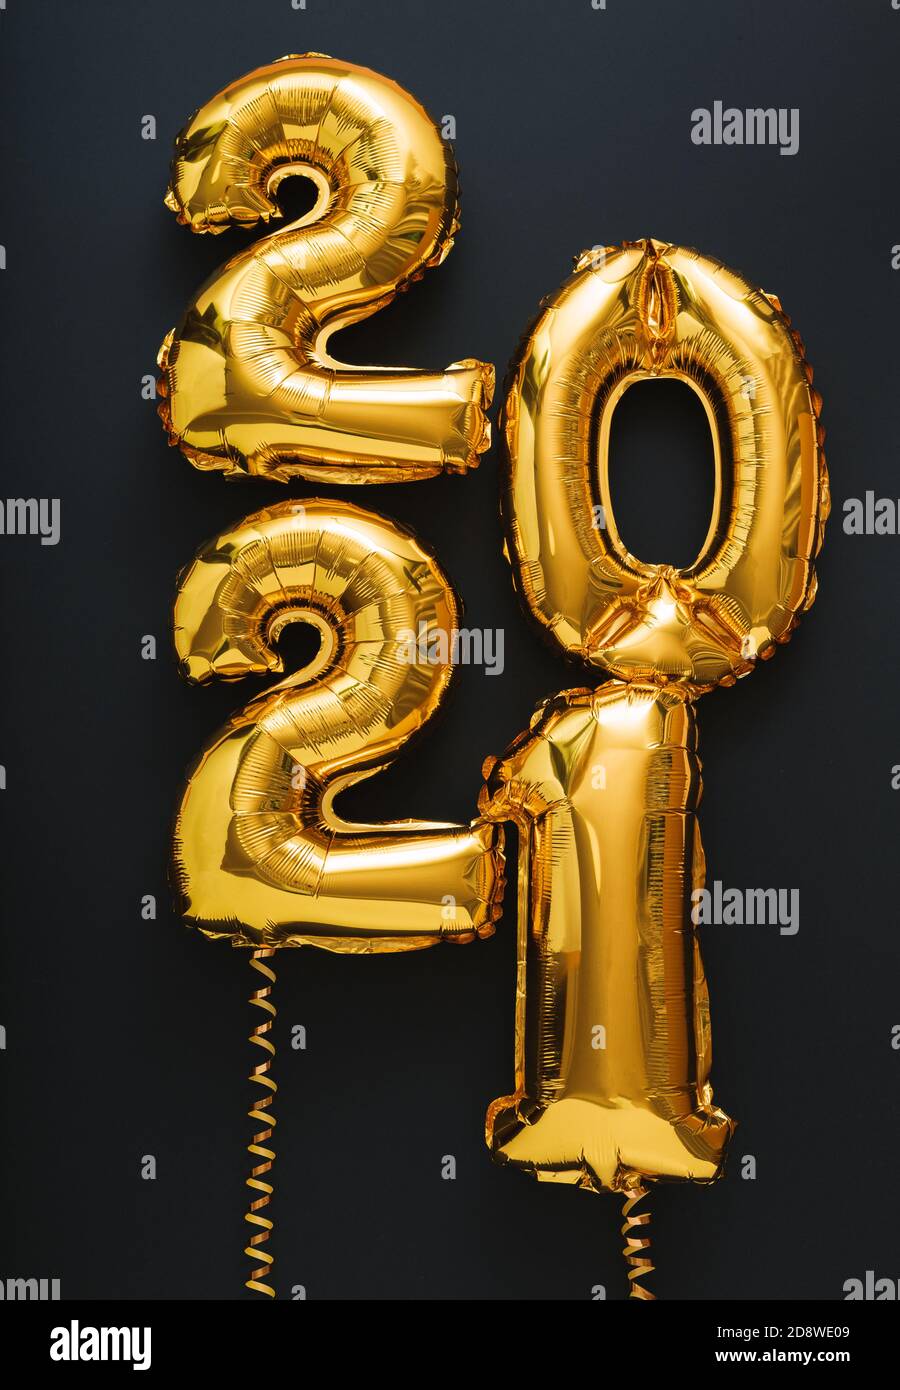 2021 balloon gold text on black background. Happy New year eve invitation with Christmas gold foil balloons 2021. Vertical Stock Photo